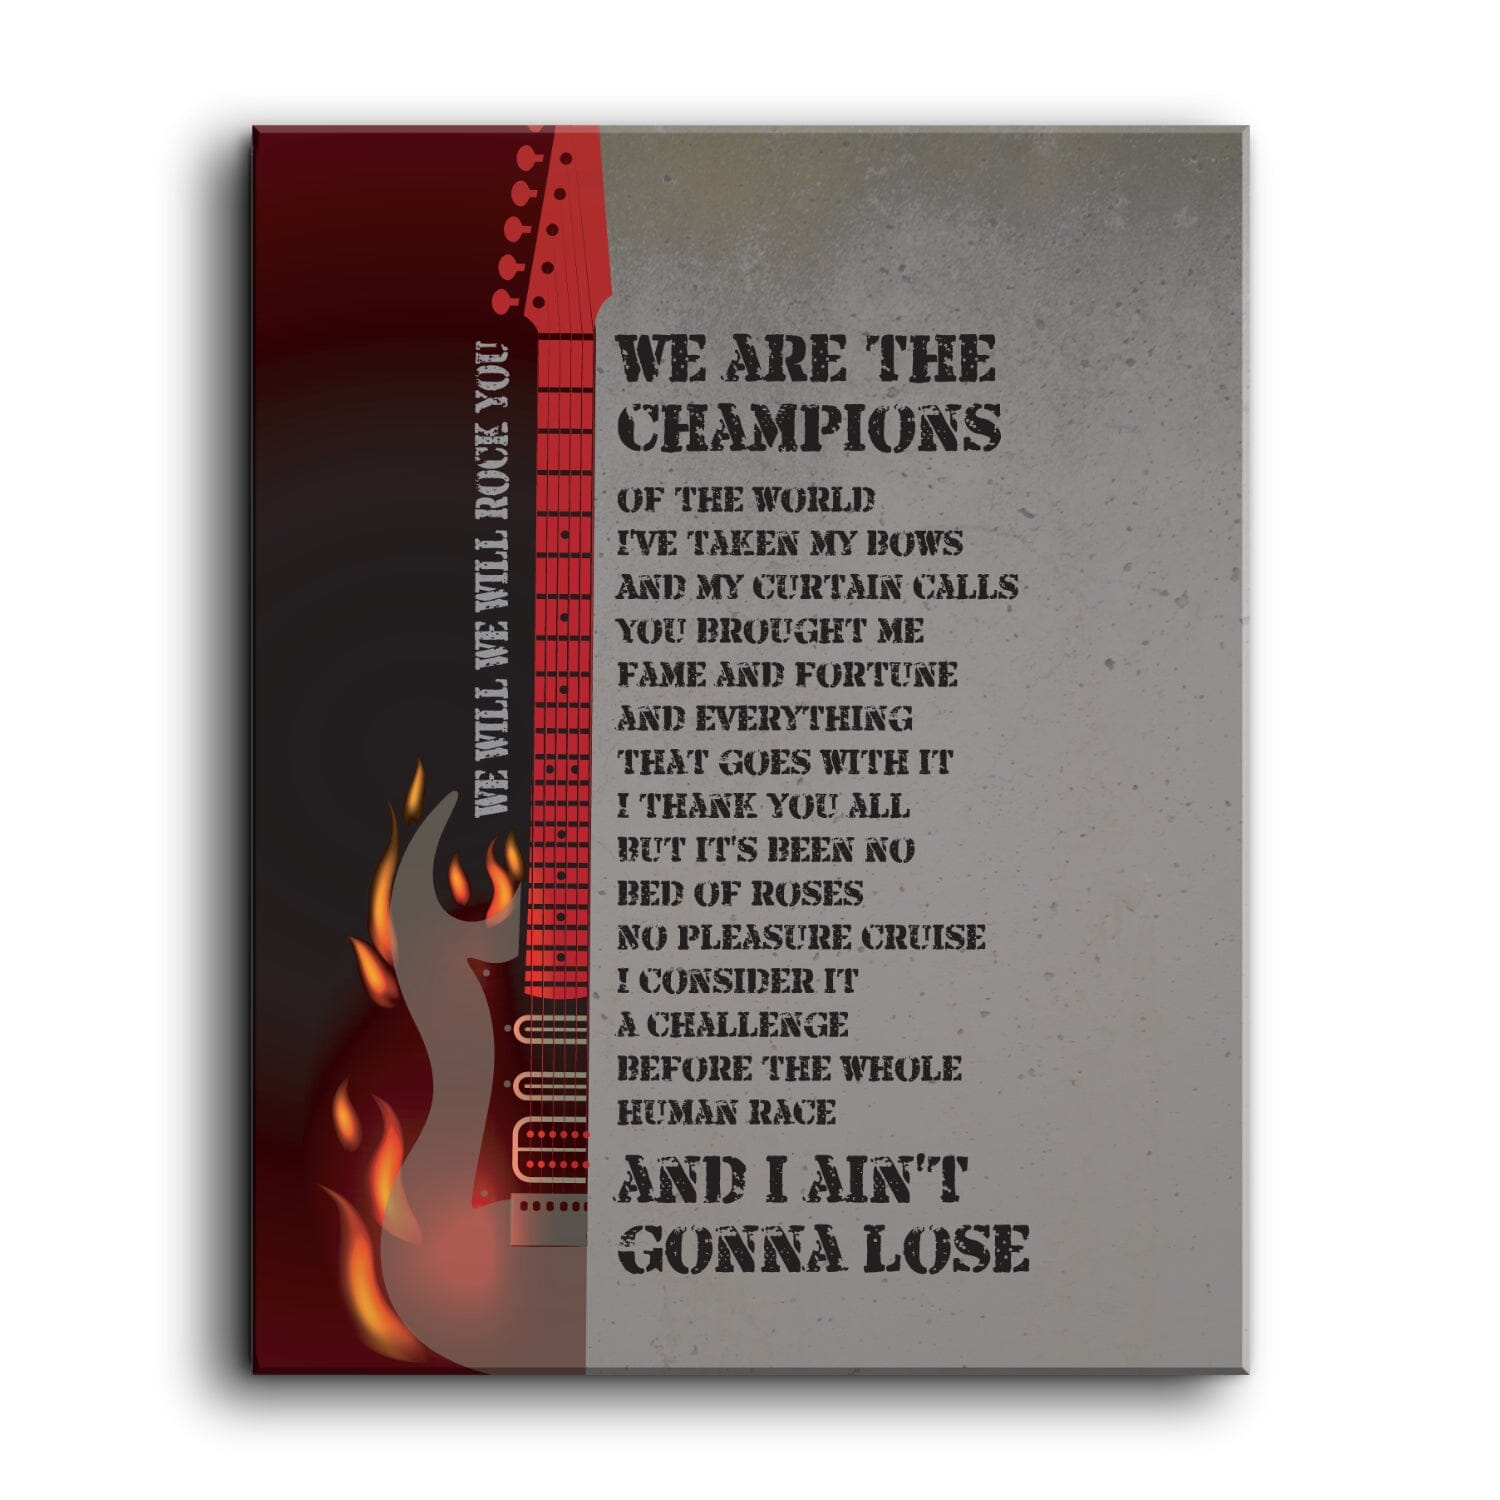 We Will Rock You, We are the Champions by Queen - Lyric Art Song Lyrics Art Song Lyrics Art 11x14 Canvas Wrap 